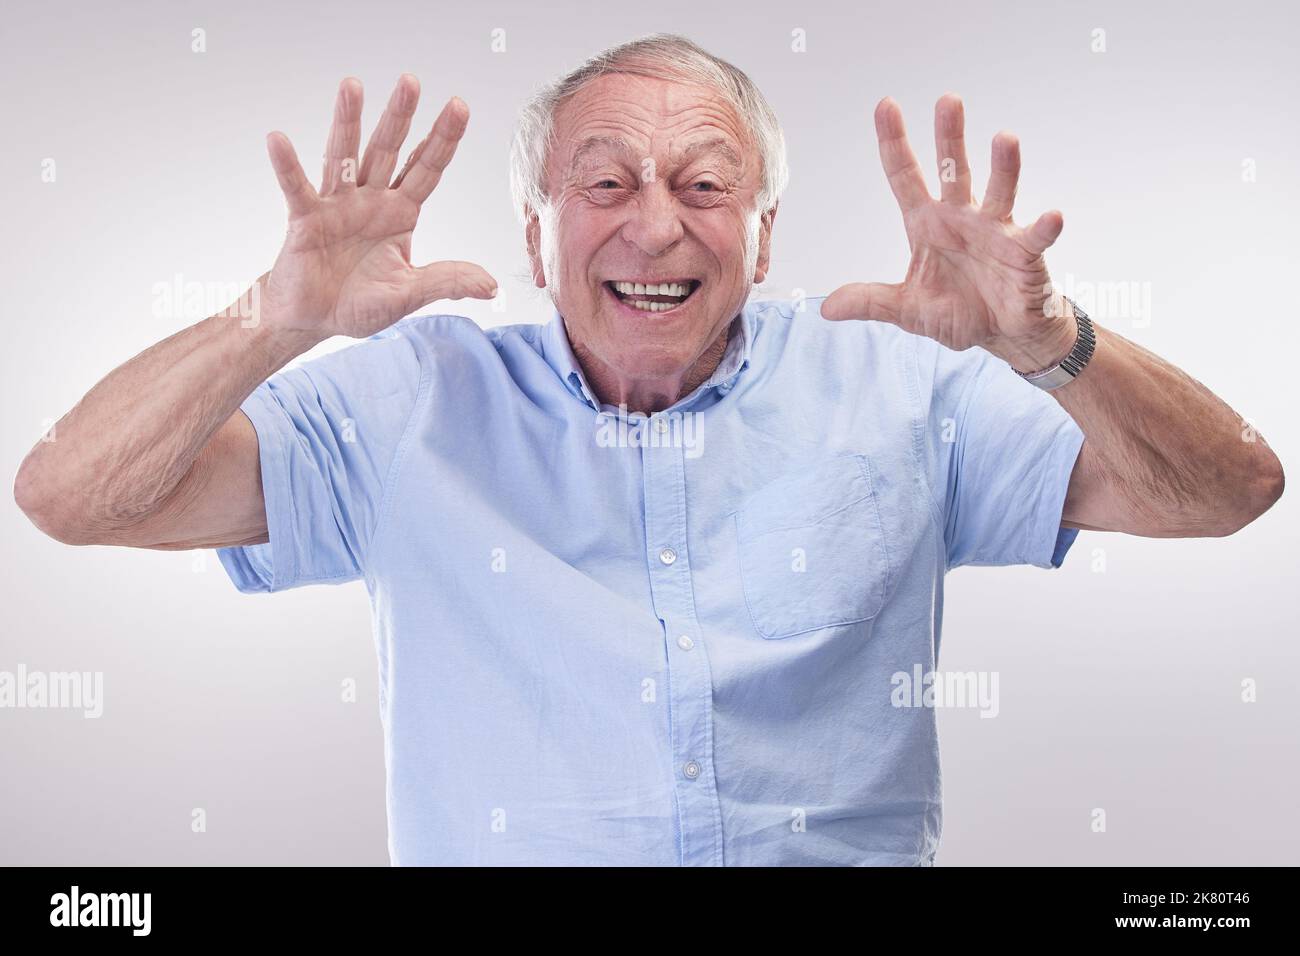 Catch me if you can. Studio shot of a senior man making a playful gesture against a grey background. Stock Photo